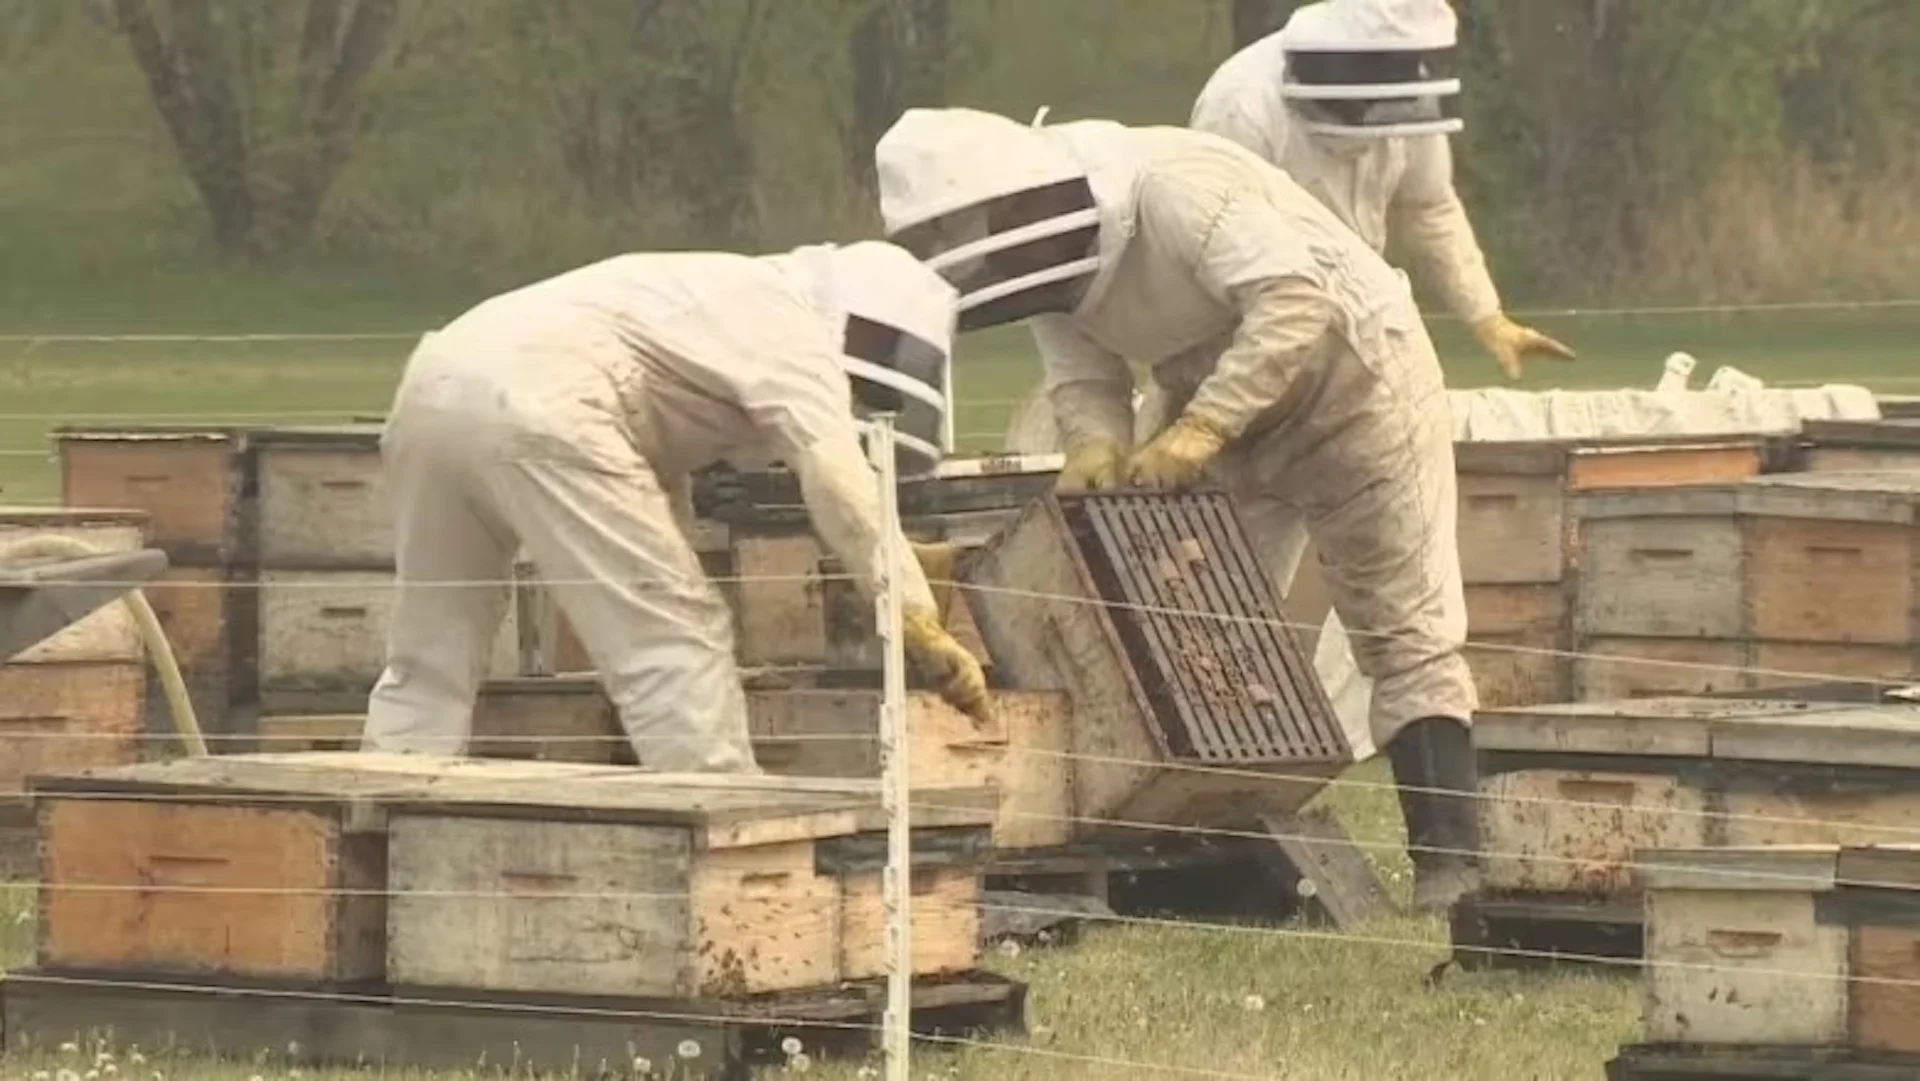 Alberta beekeepers, conservation experts worry about wildfire impact on bees